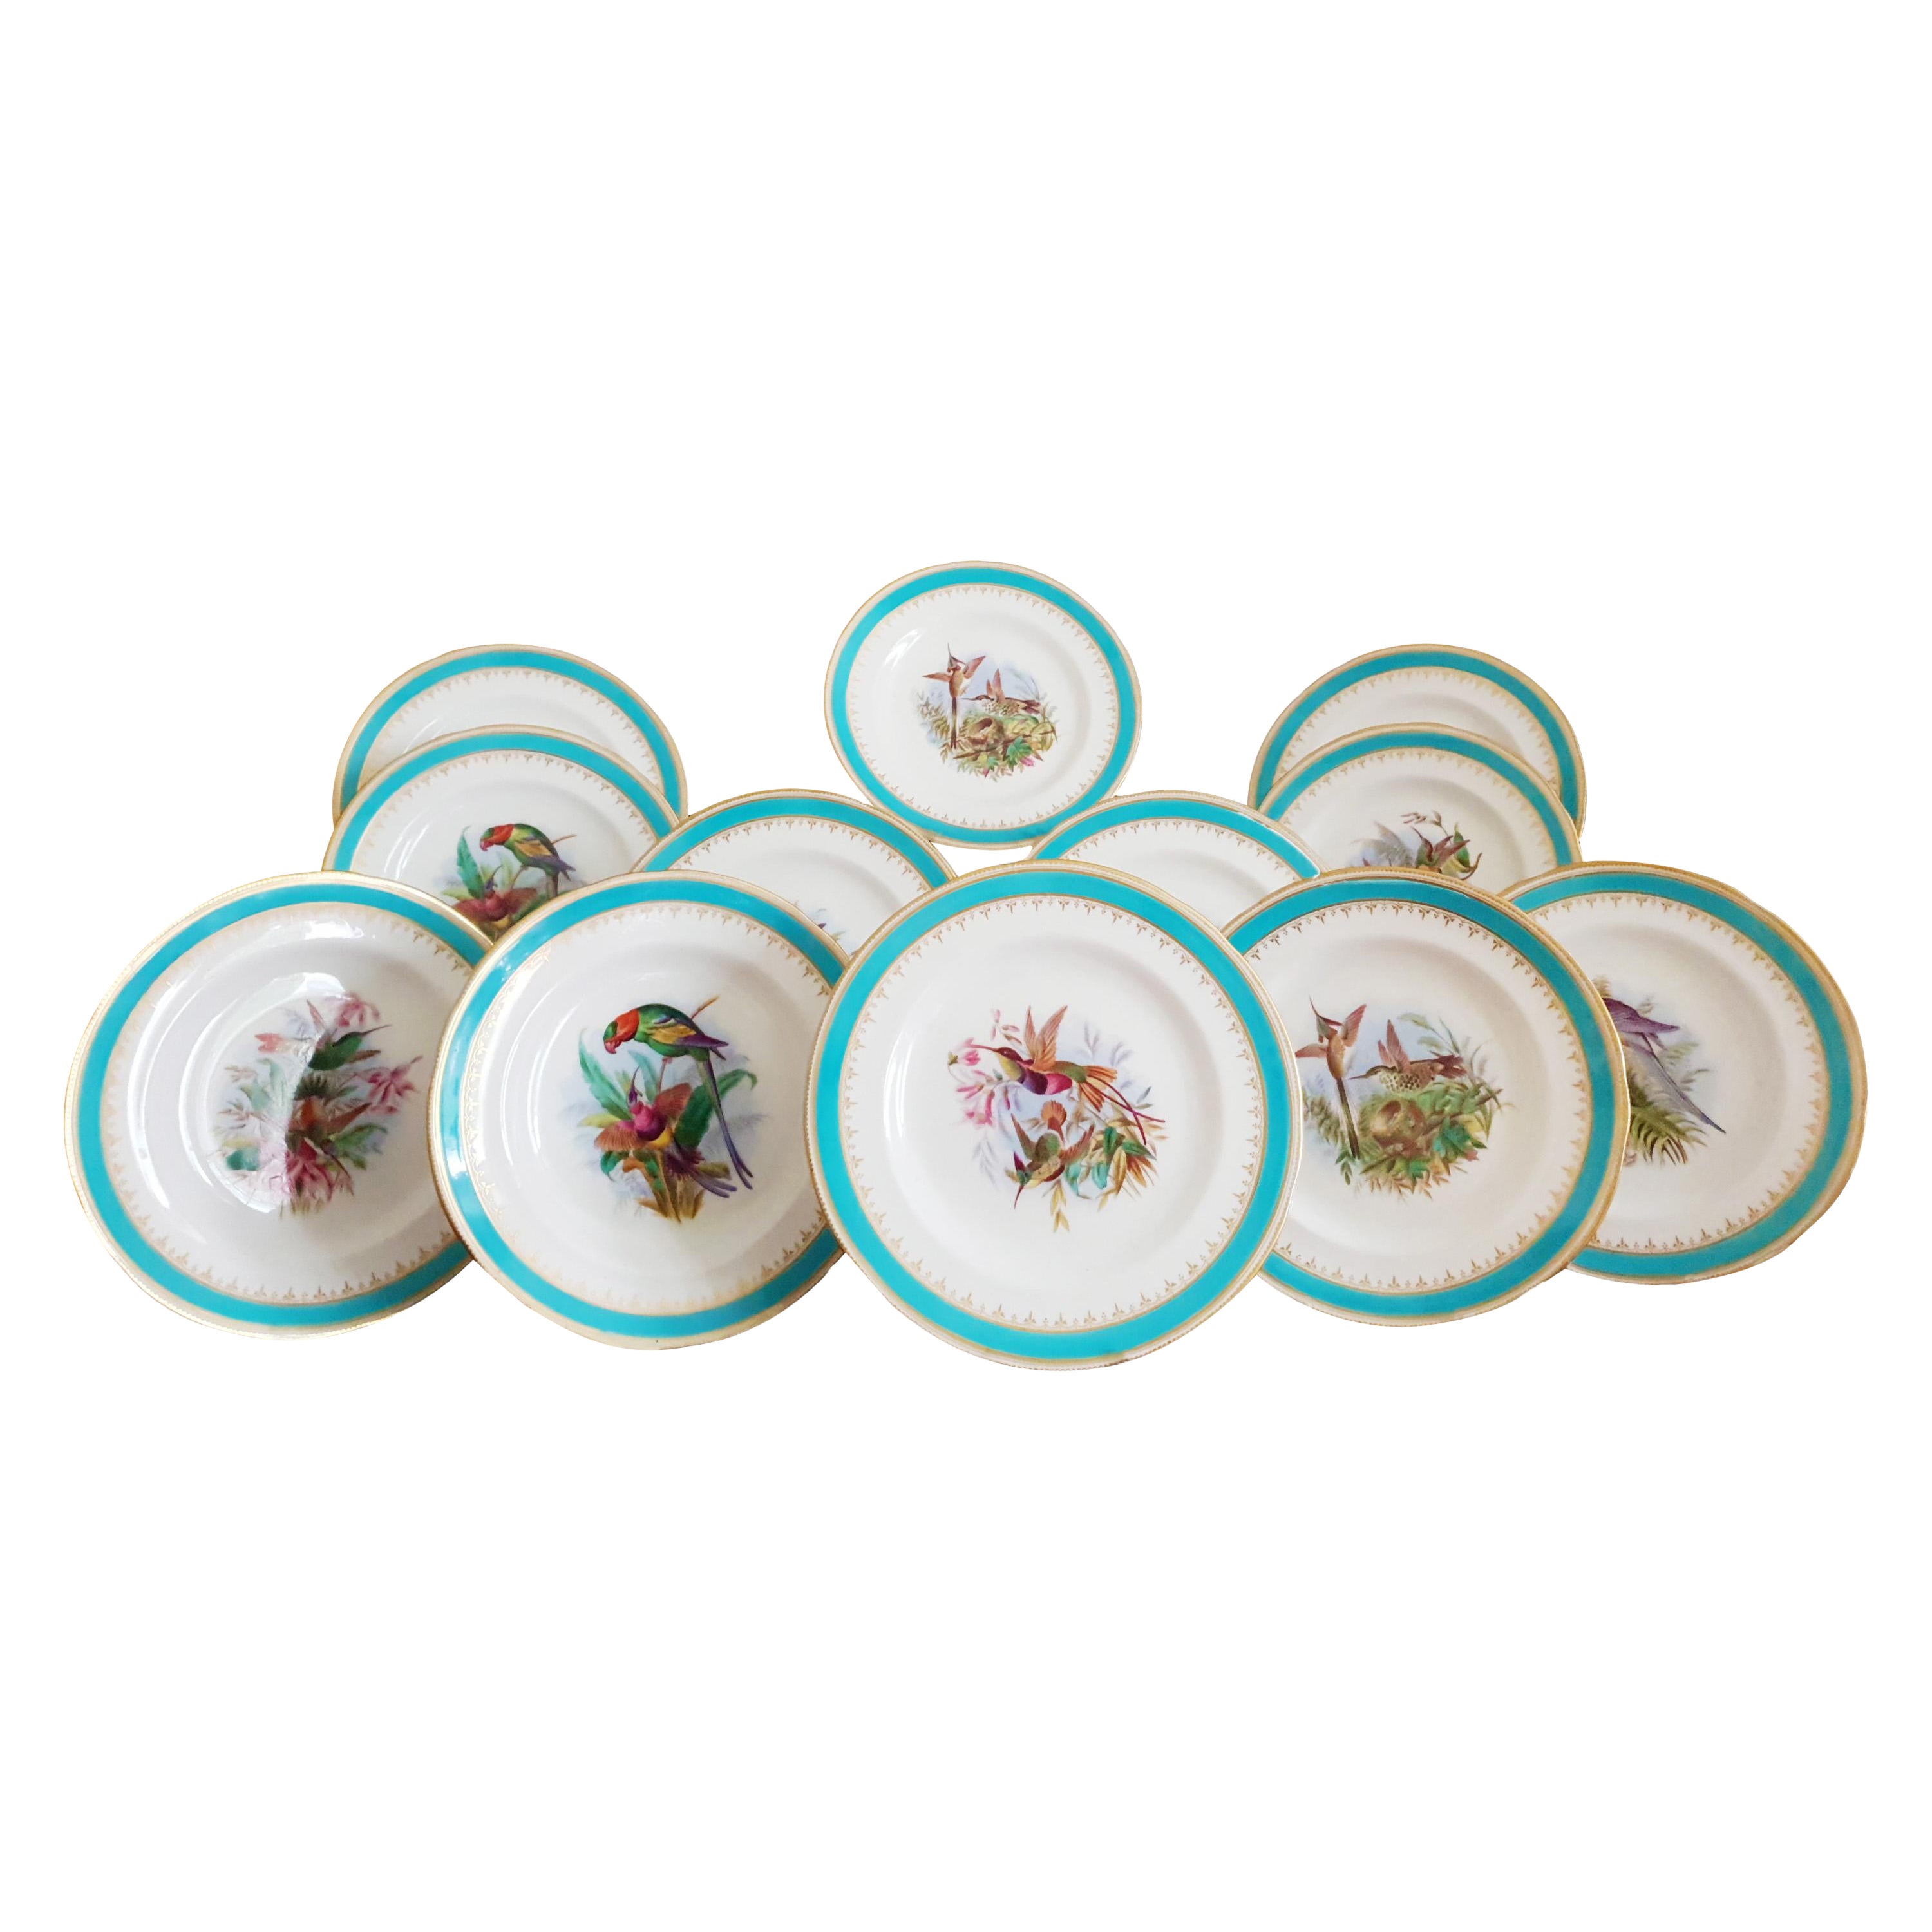 Minton Hand Painted Dinner Plates with Humming Birds and Parrots For Sale